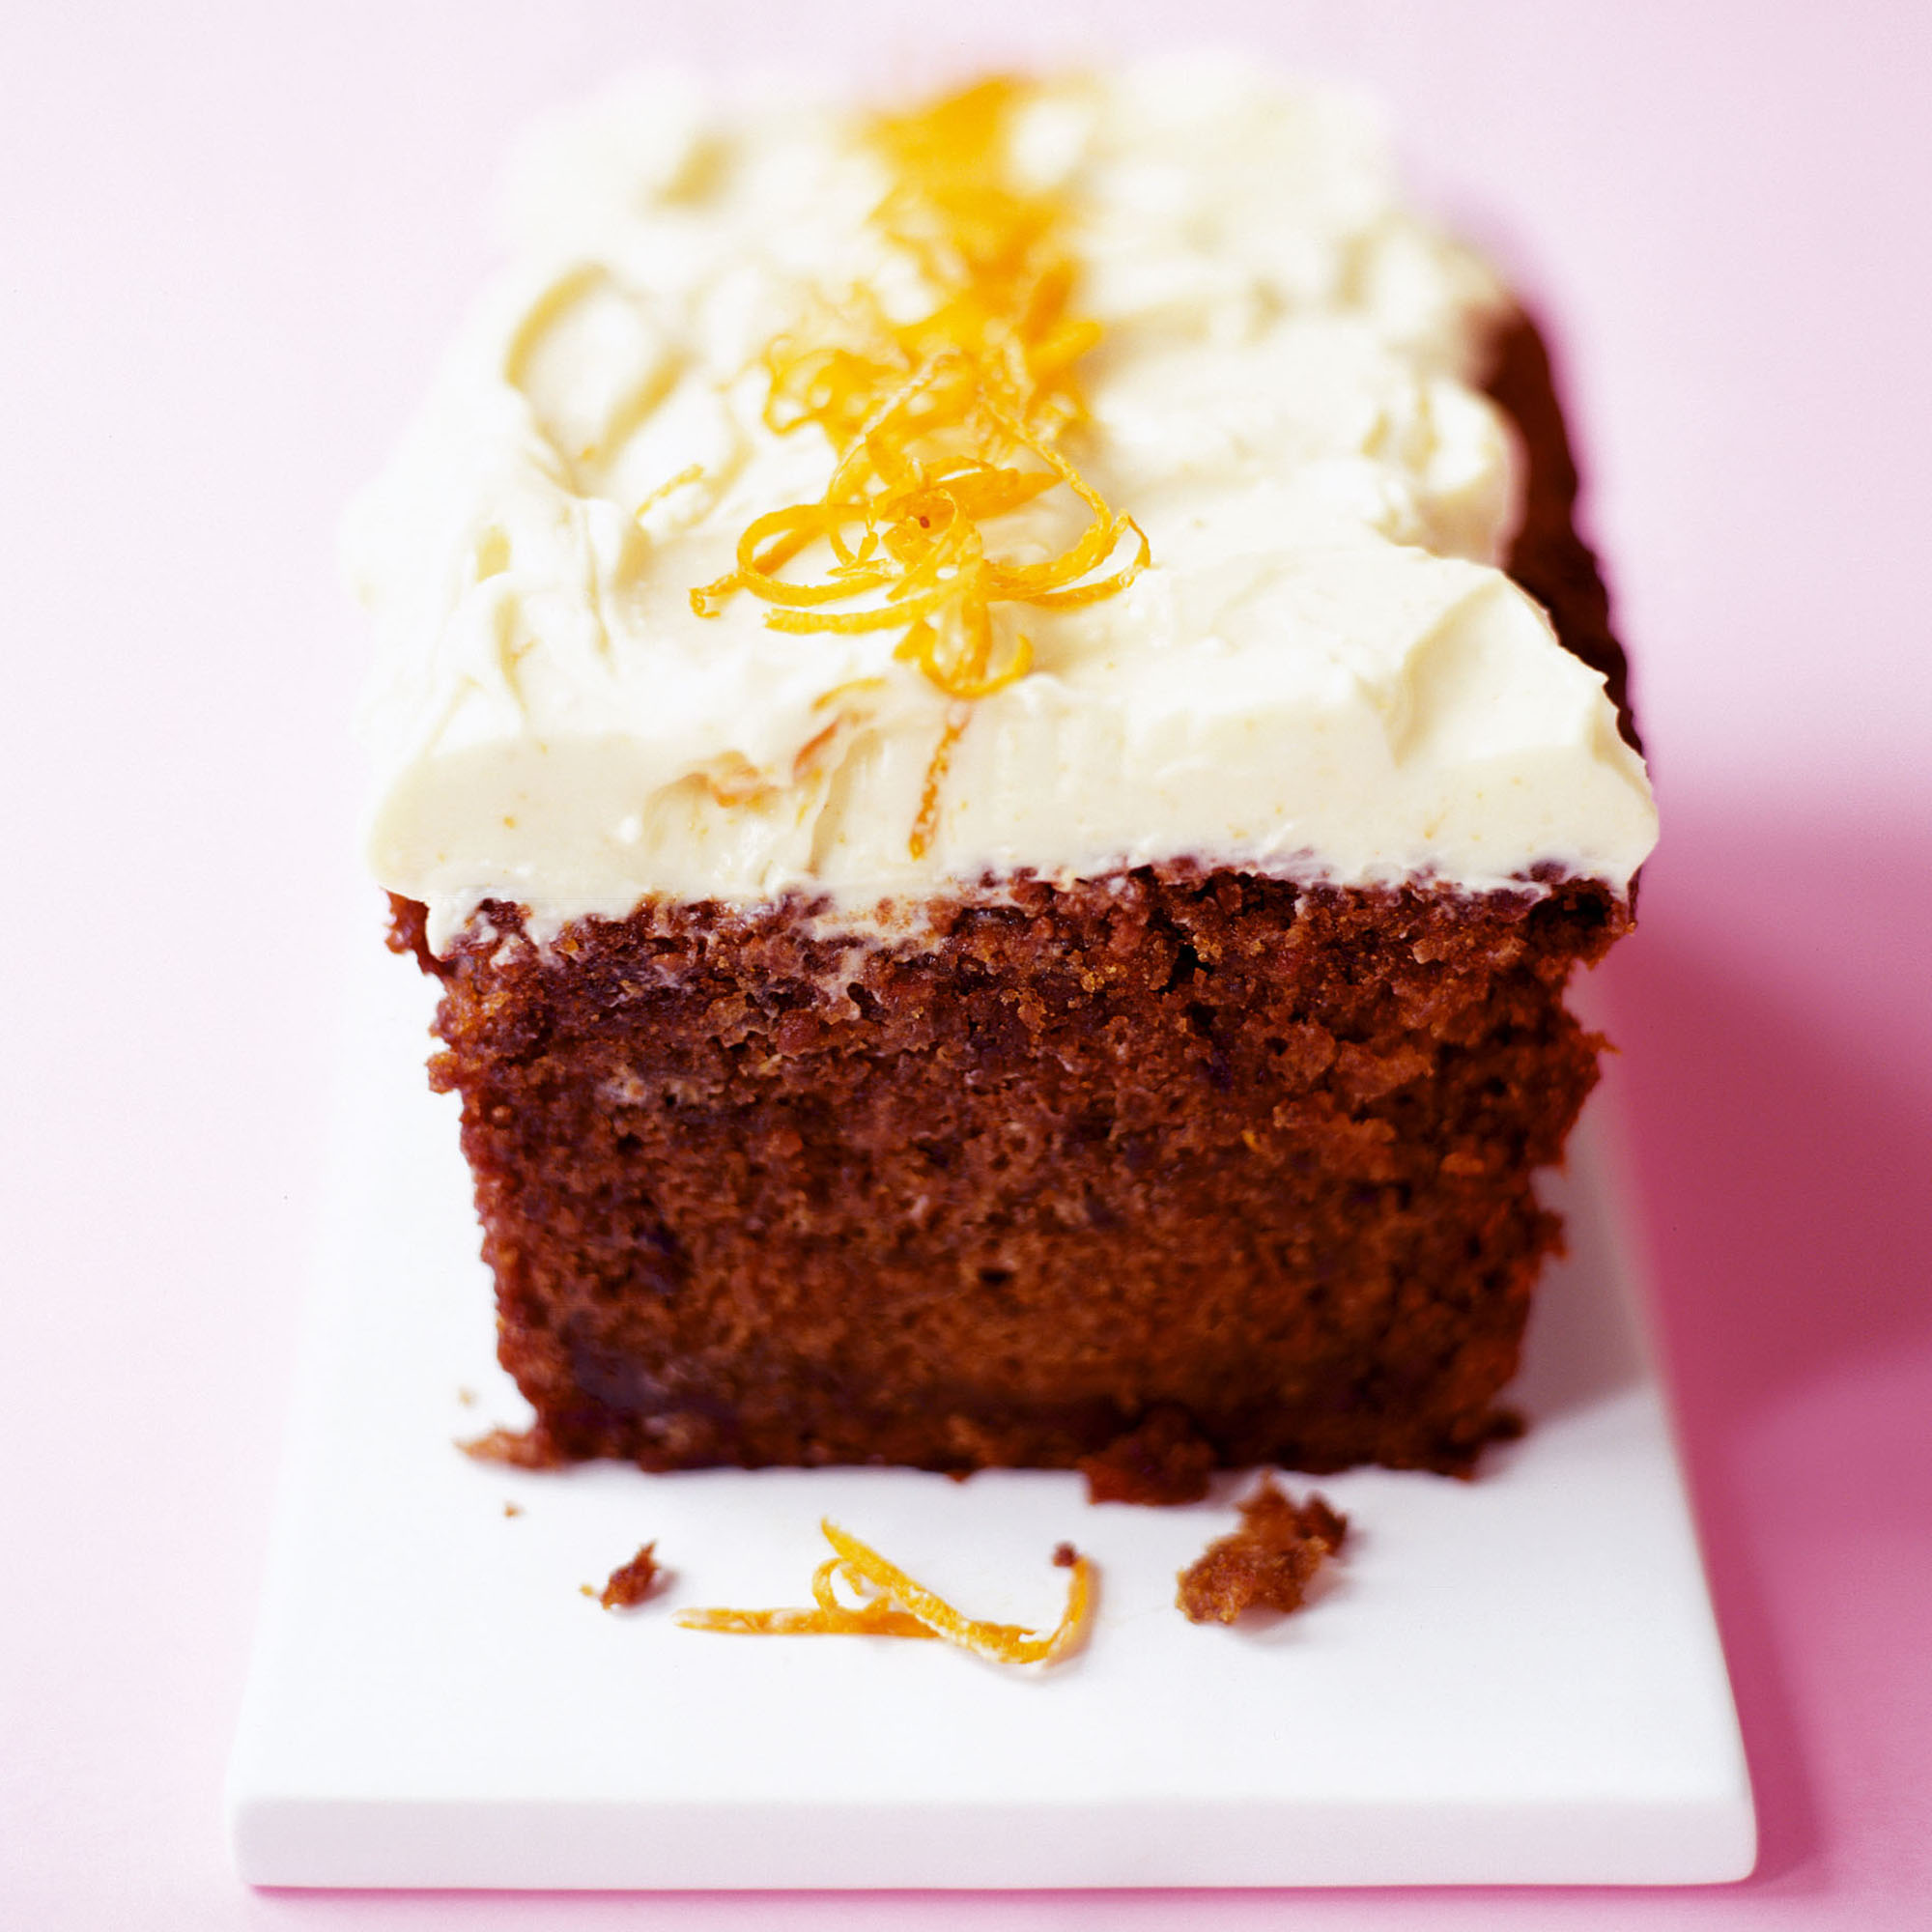 Sweet Revolution - How delicious does this look?😍 This healthy no-bake  carrot and beetroot cake is super simple to make! Topped with raw cashew  icing, not only does it look amazing but